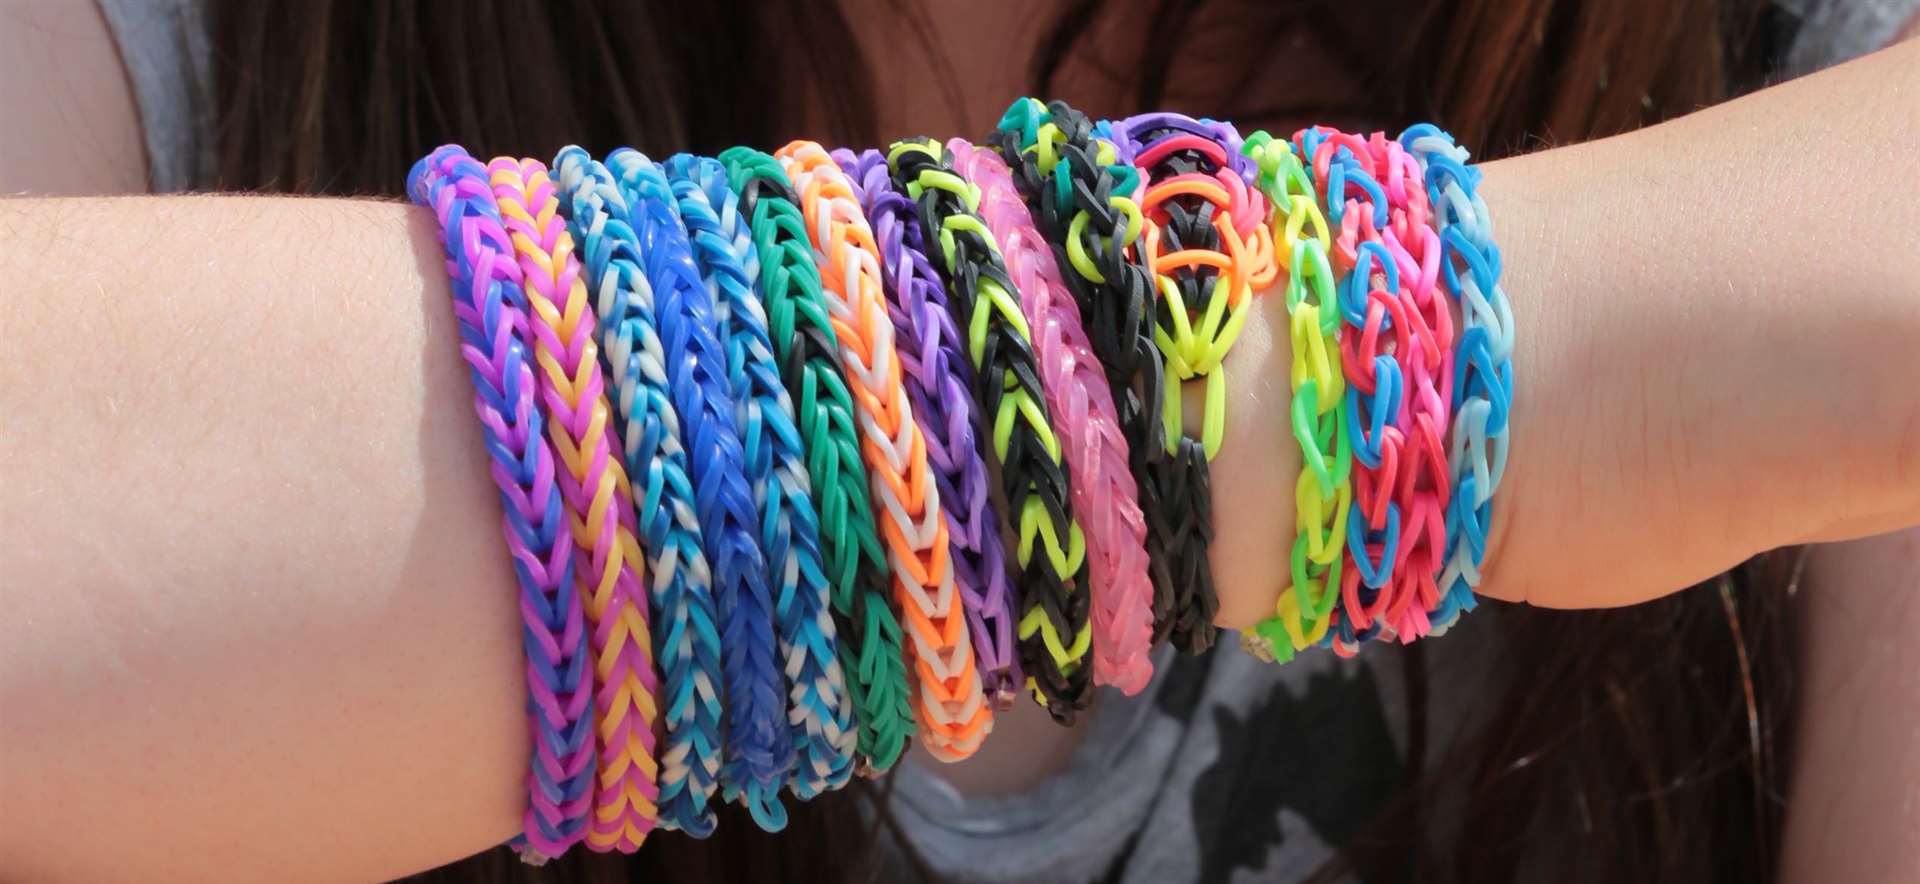 Loom bands used to make friendship bracelets were hugely popular around five to seven years ago